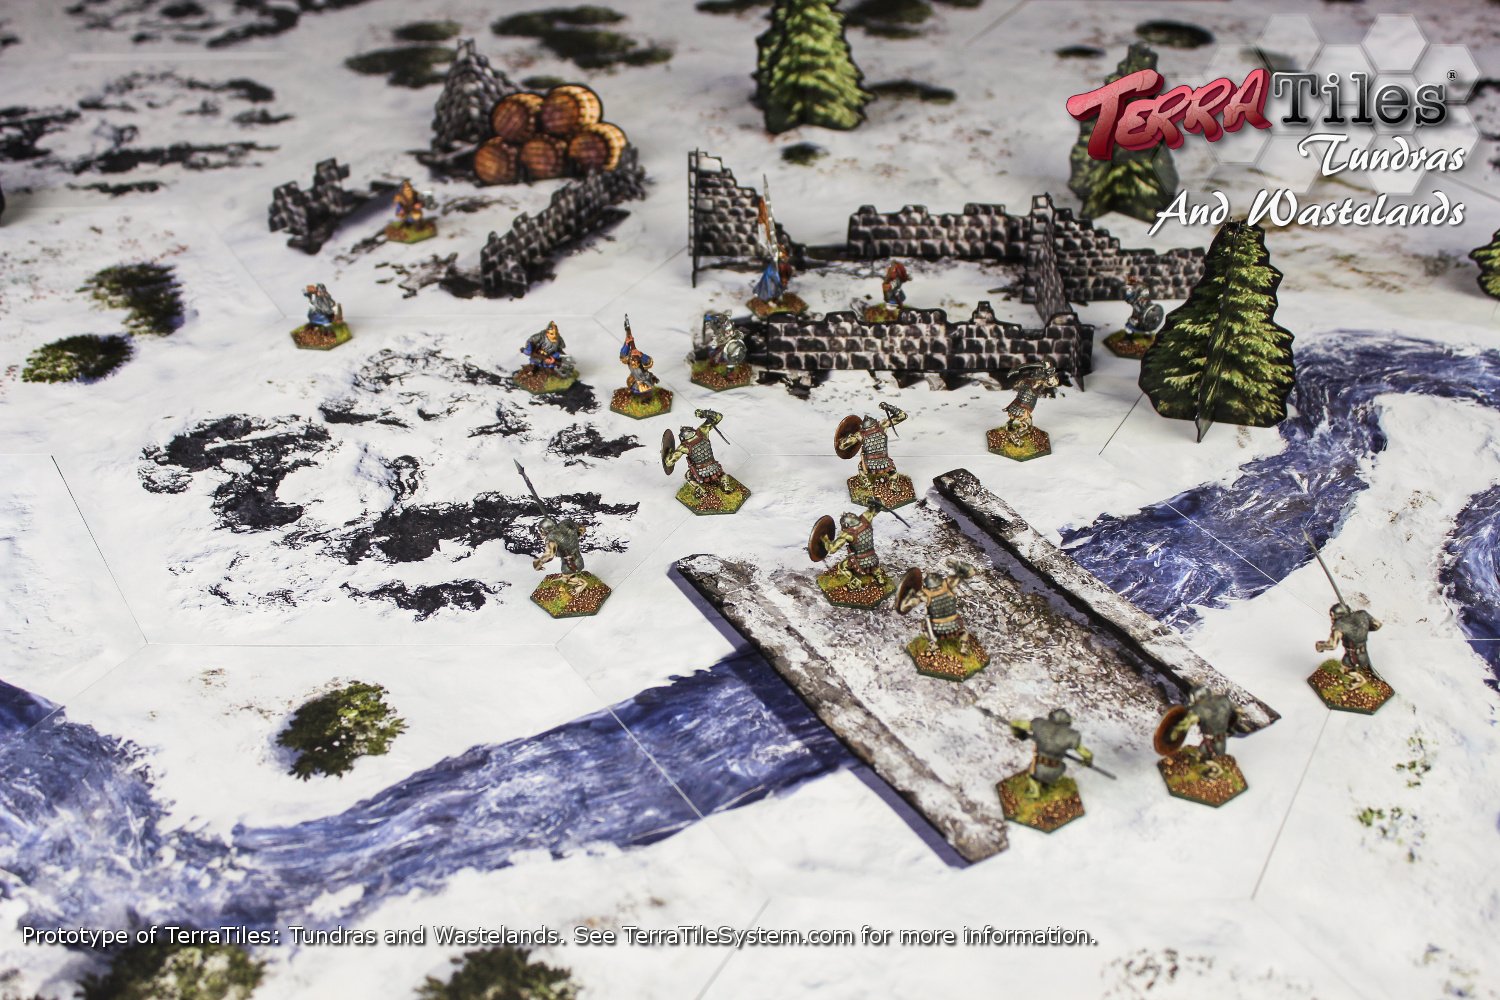 Winter Terrain Available – Take 20% Off!